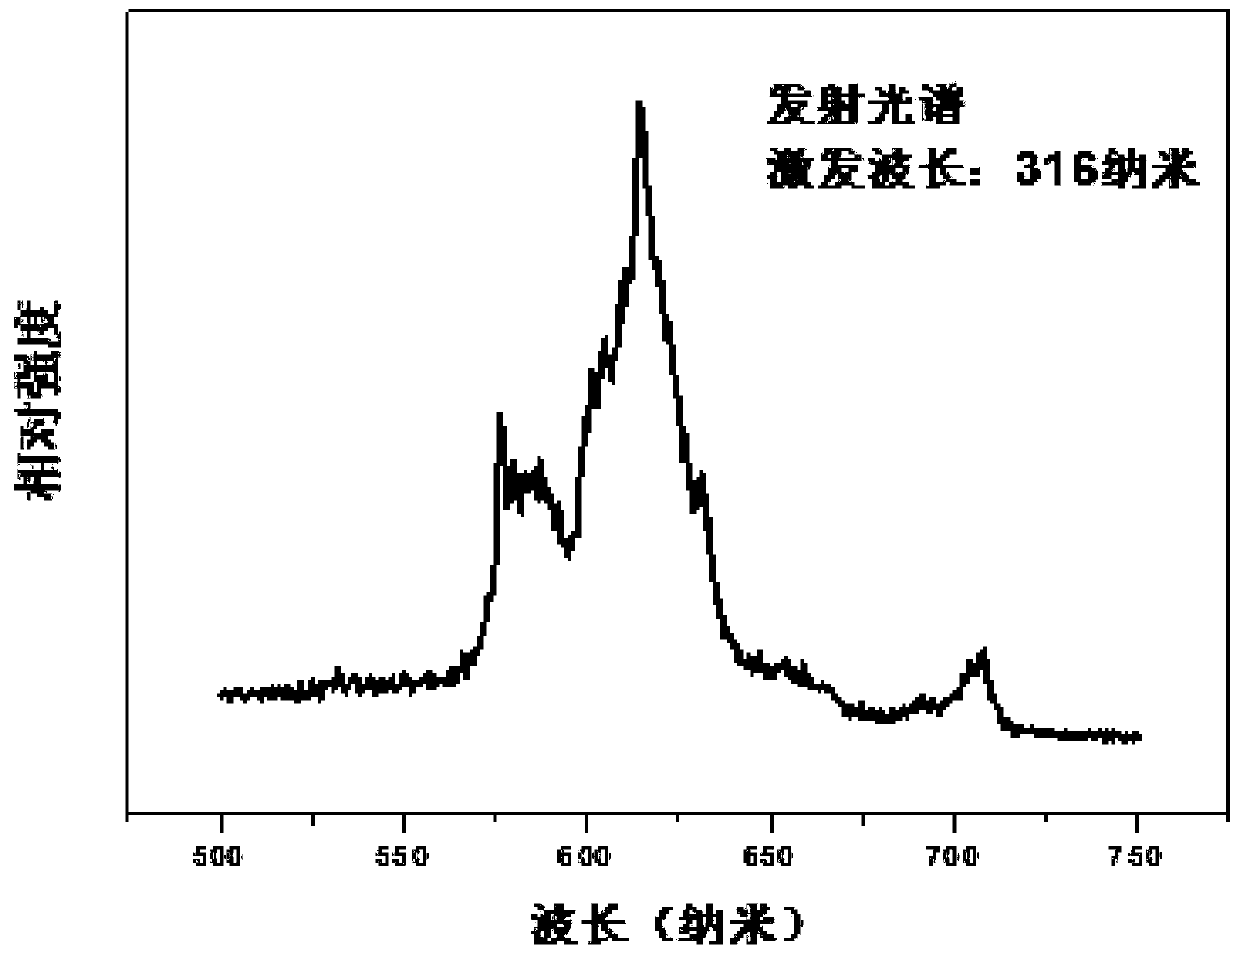 Aluminate red phosphor suitable for excitation from near ultraviolet to blue light and preparation method thereof